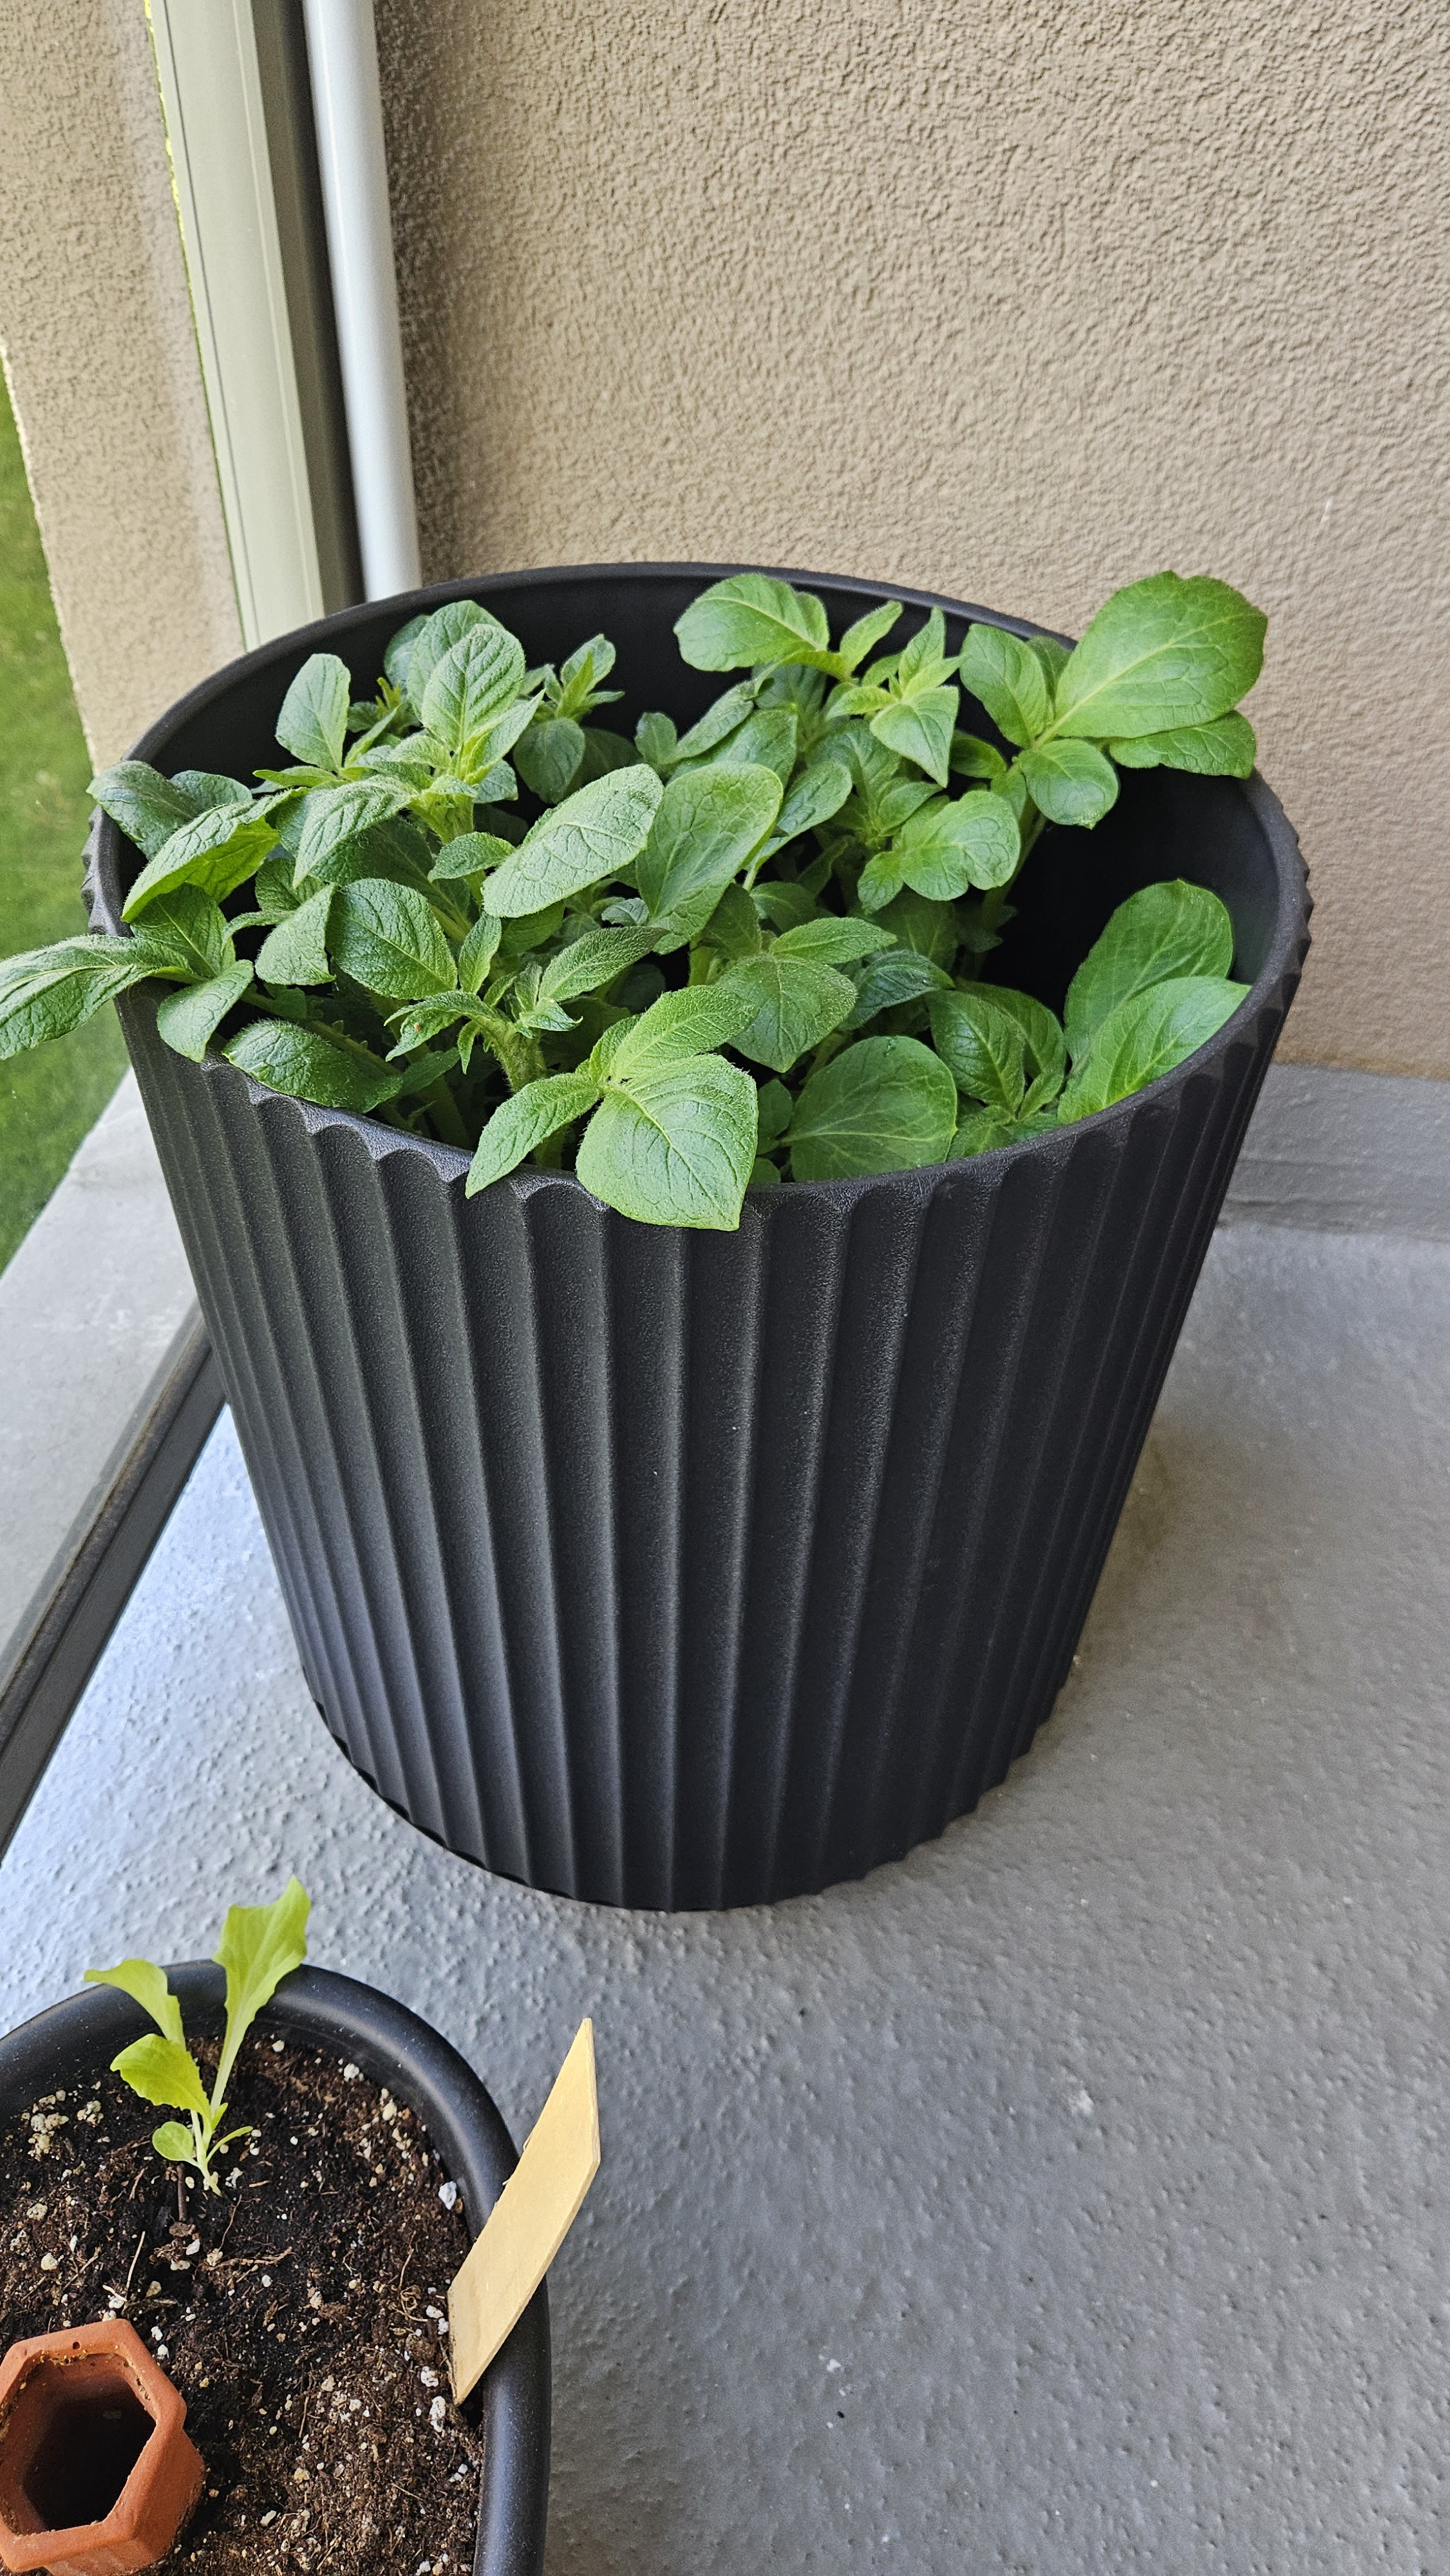 photo of small potato shoots emerging from a large black planter